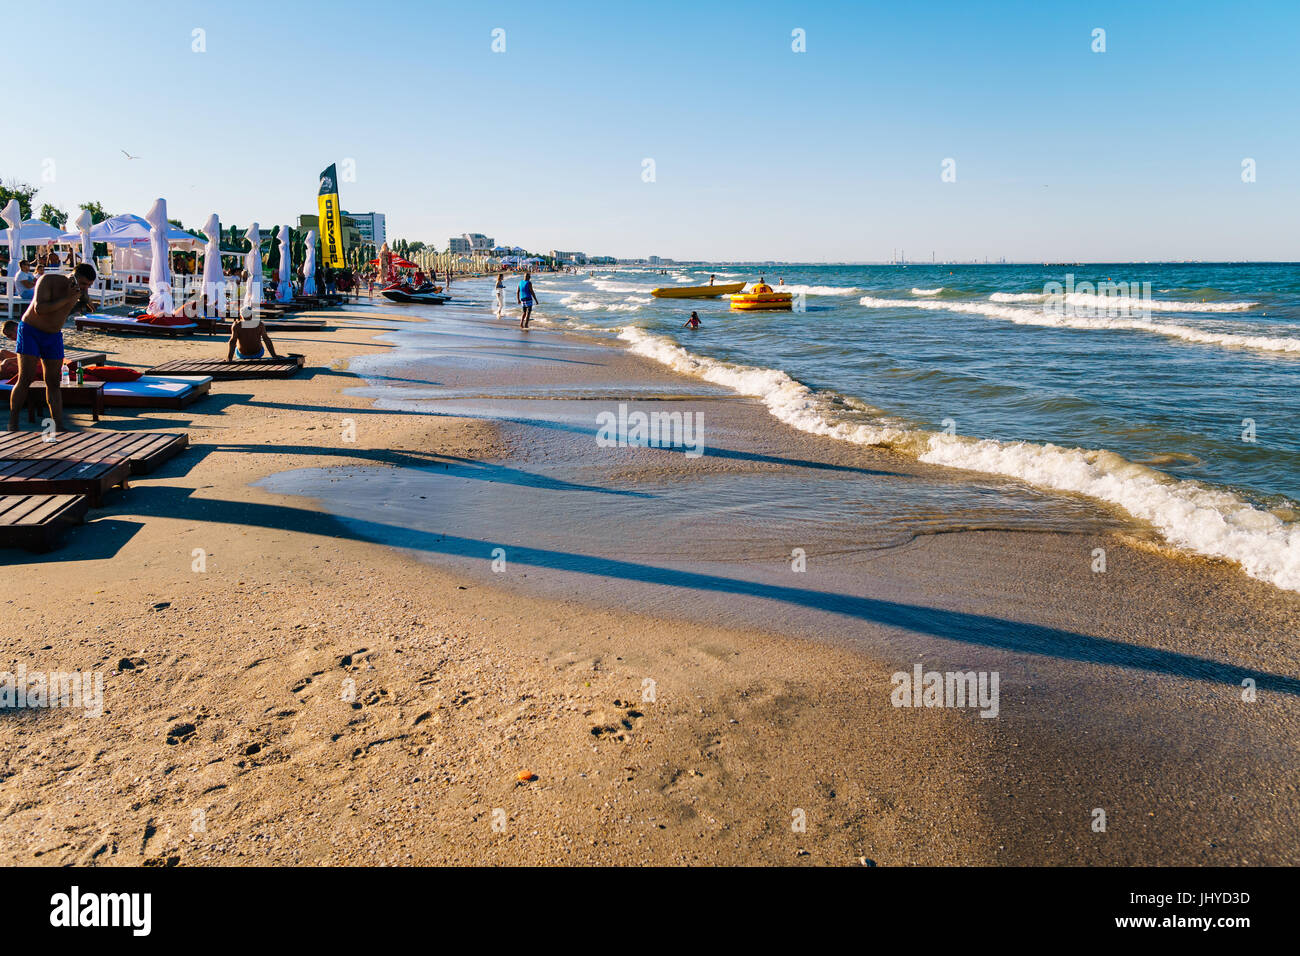 MAMAIA, ROMANIA - JULY 14, 2017: People Having Fun In Water And Relaxing In Mamaia Beach Resort At The Black Sea In Romania. Stock Photo